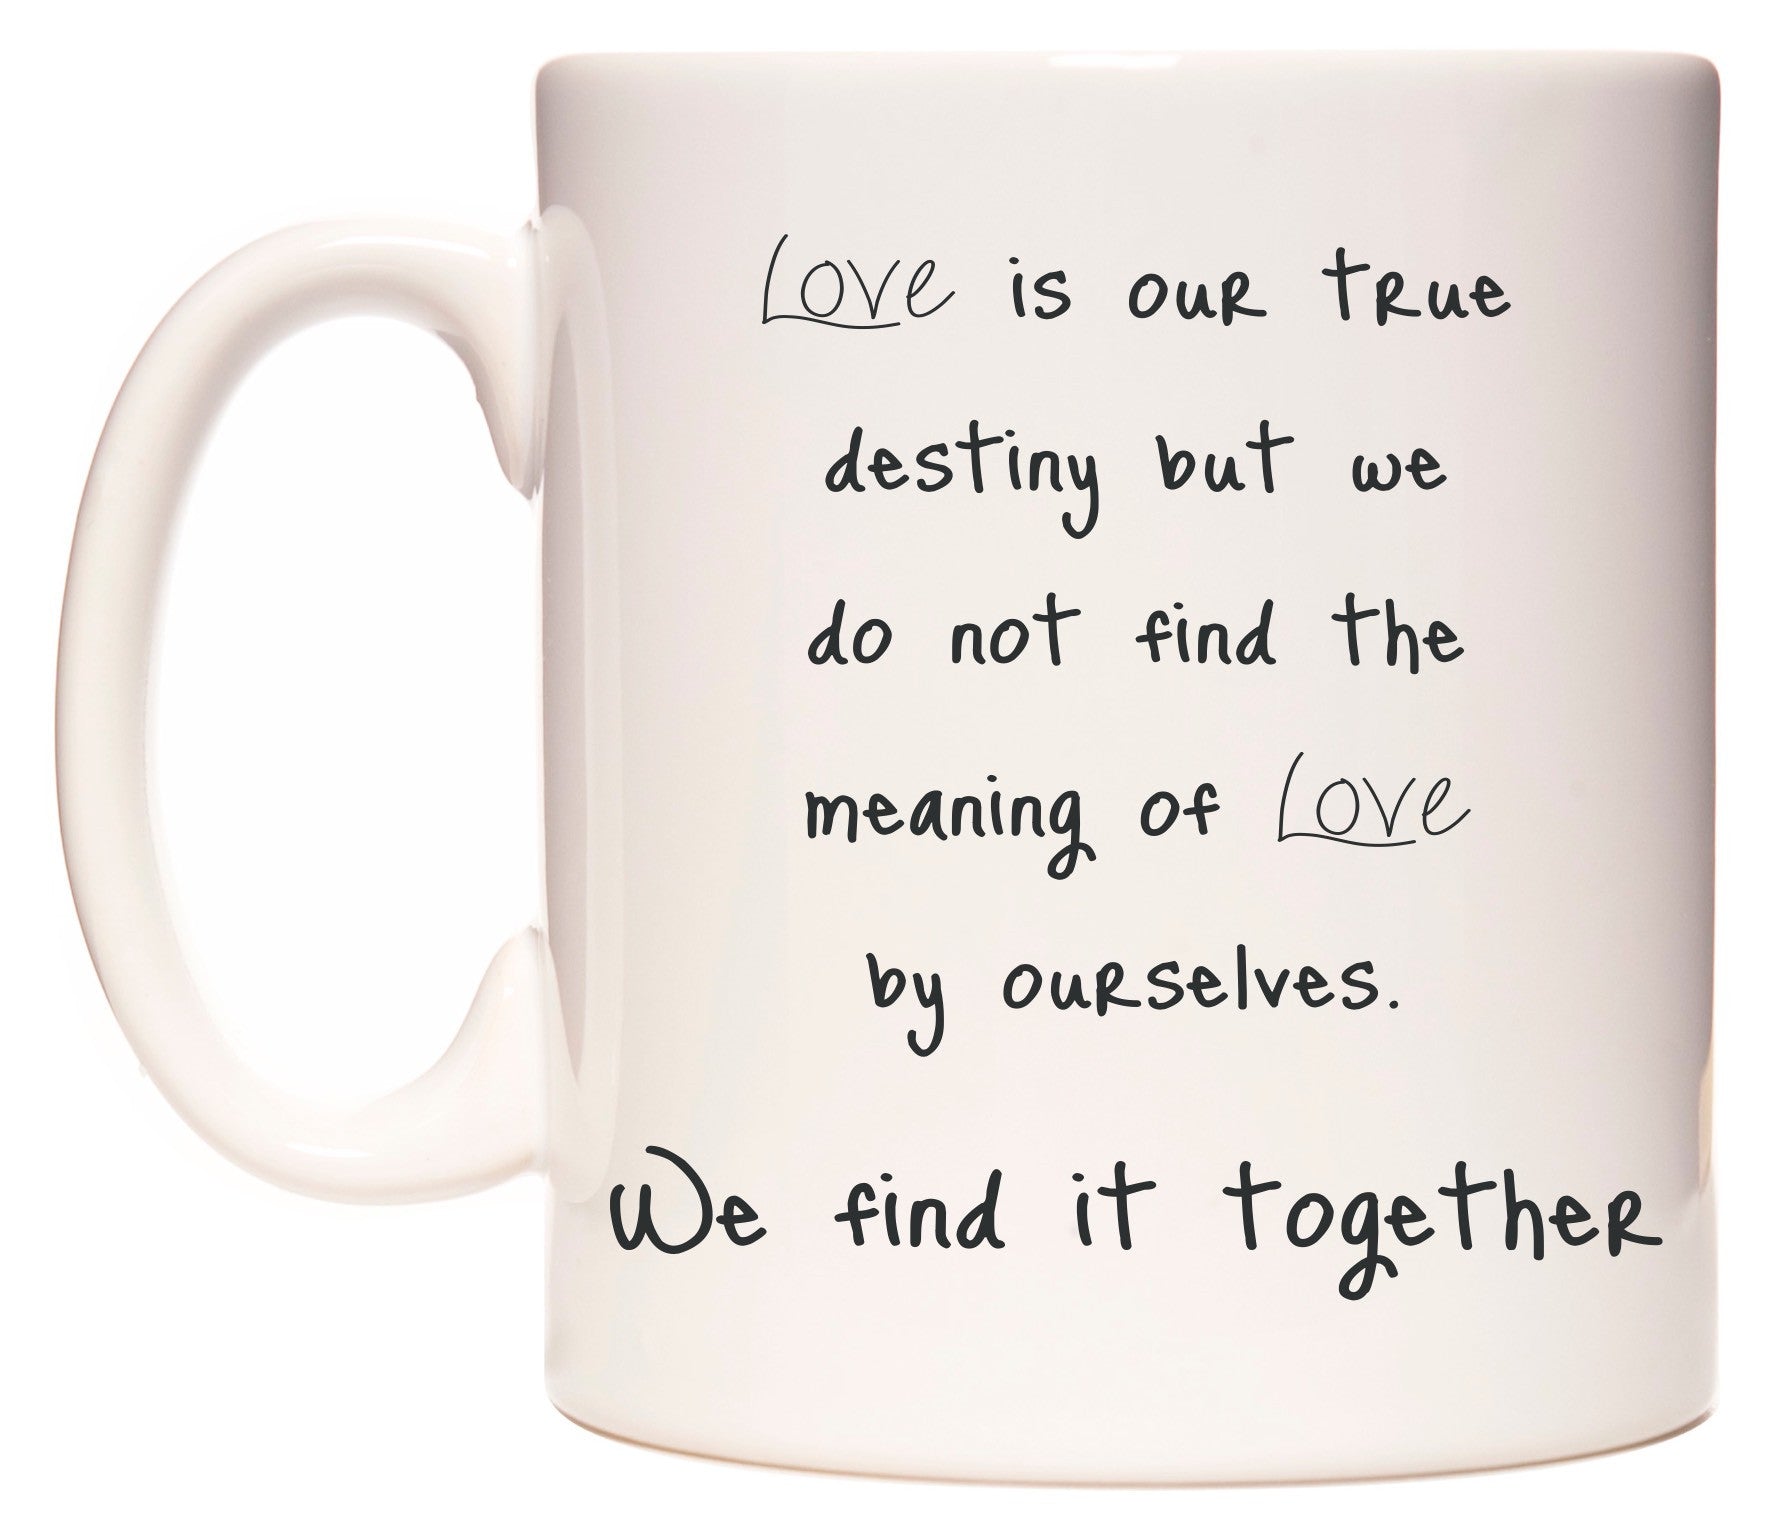 This mug features Love is our true destiny..